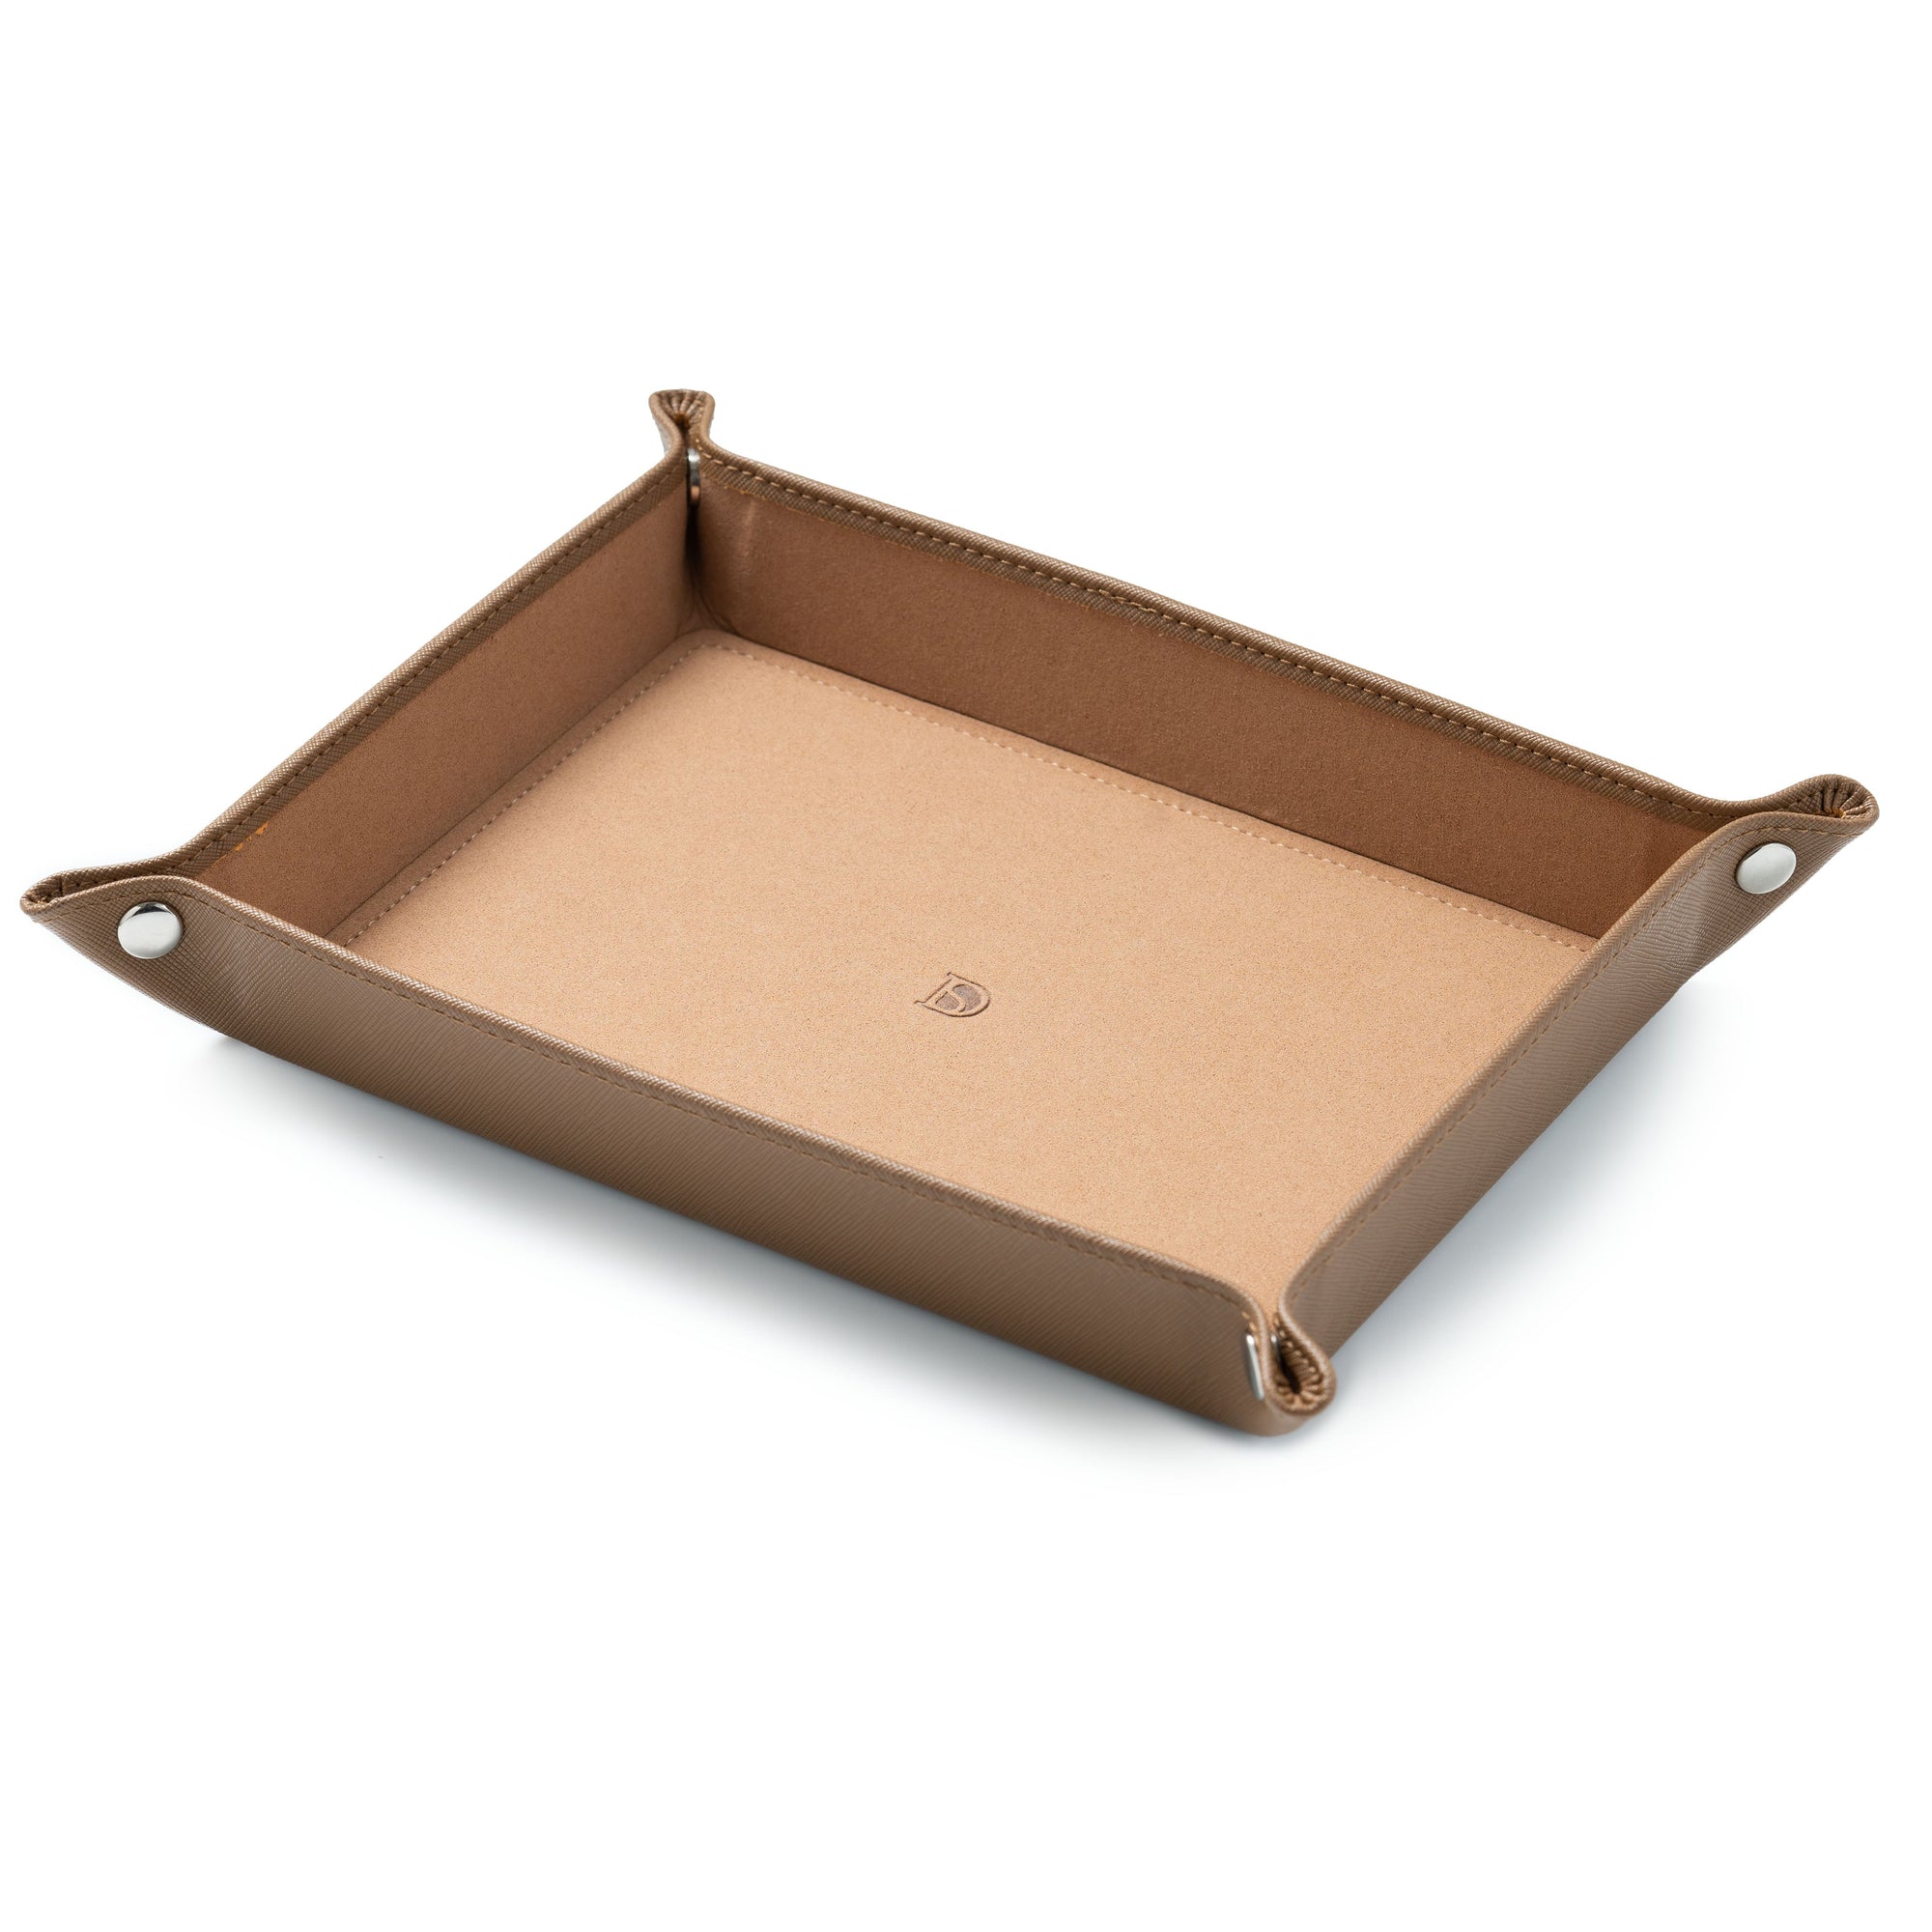 Gaucho Casa Large Square Leather Valet Tray in Apricot